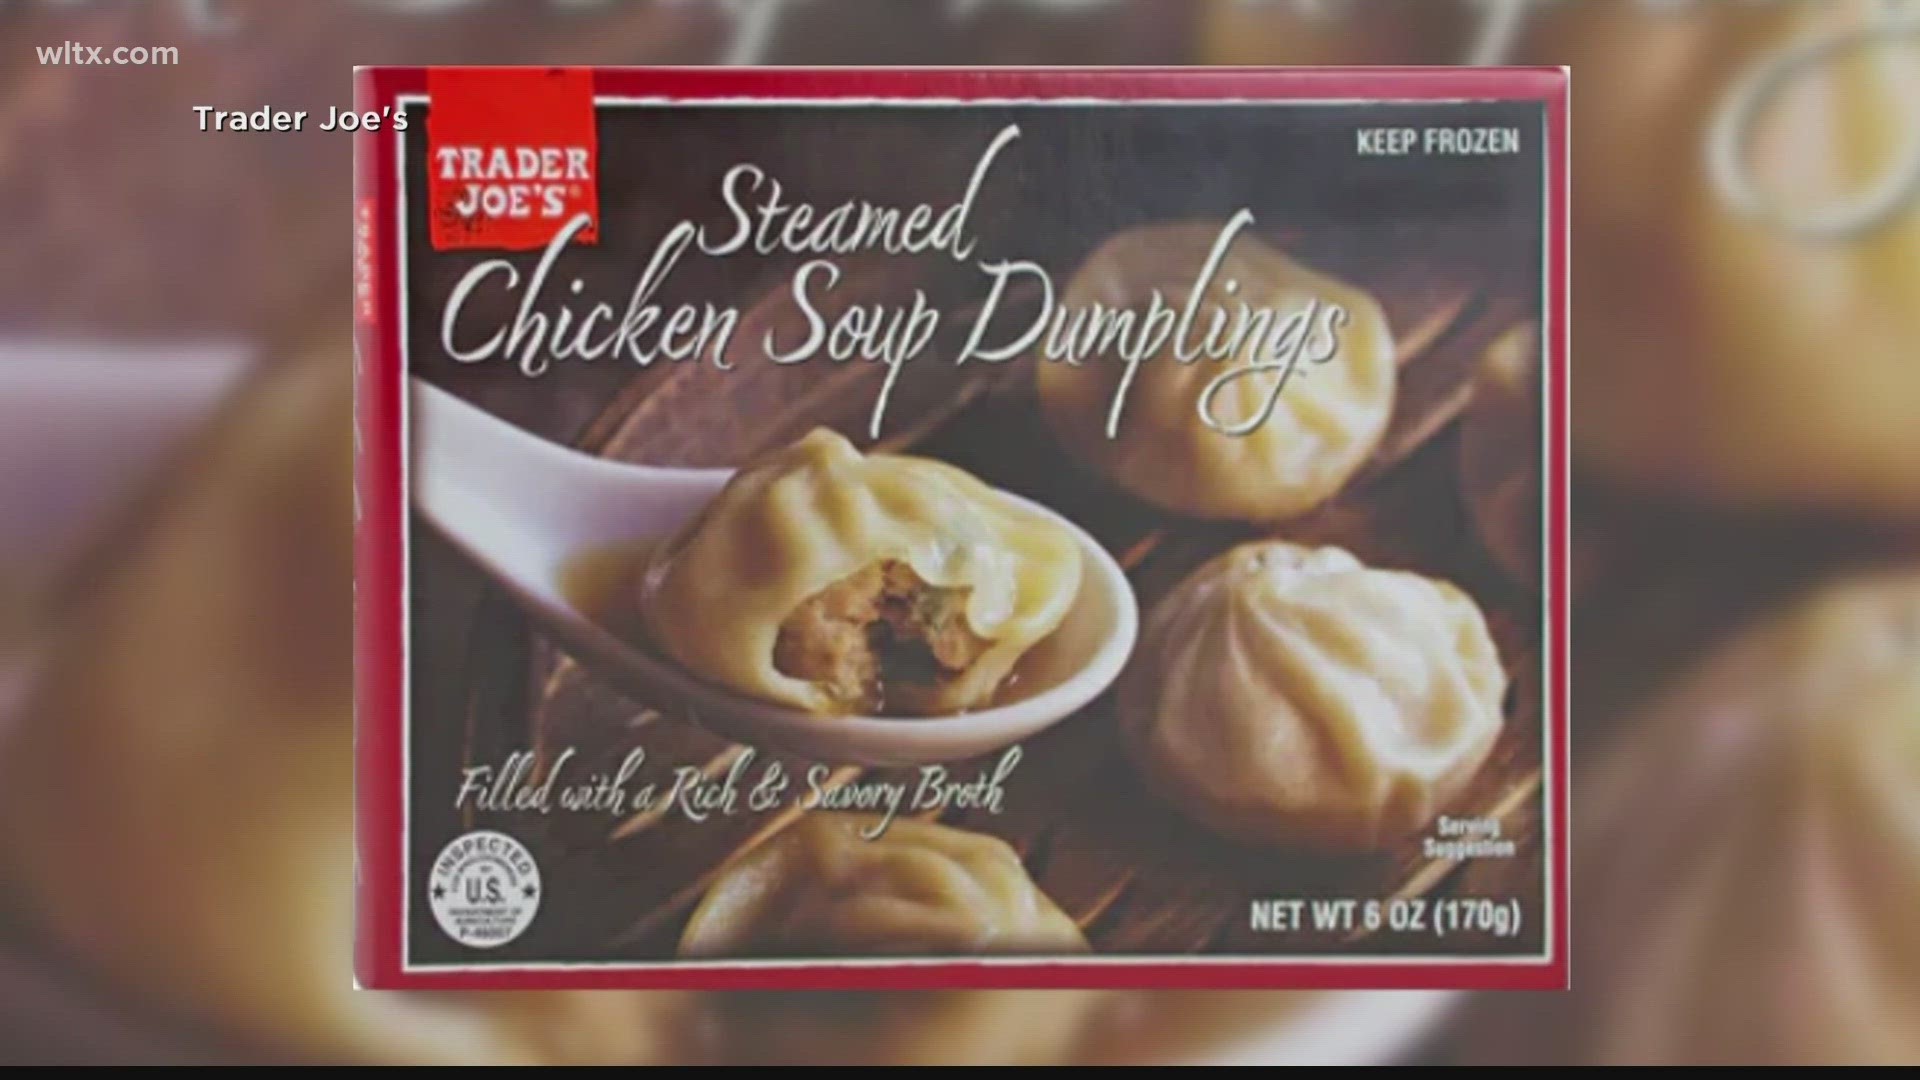 Trader Joe's is recalling it's Chicken soup dumplings as it could contain permanent marker plastic.